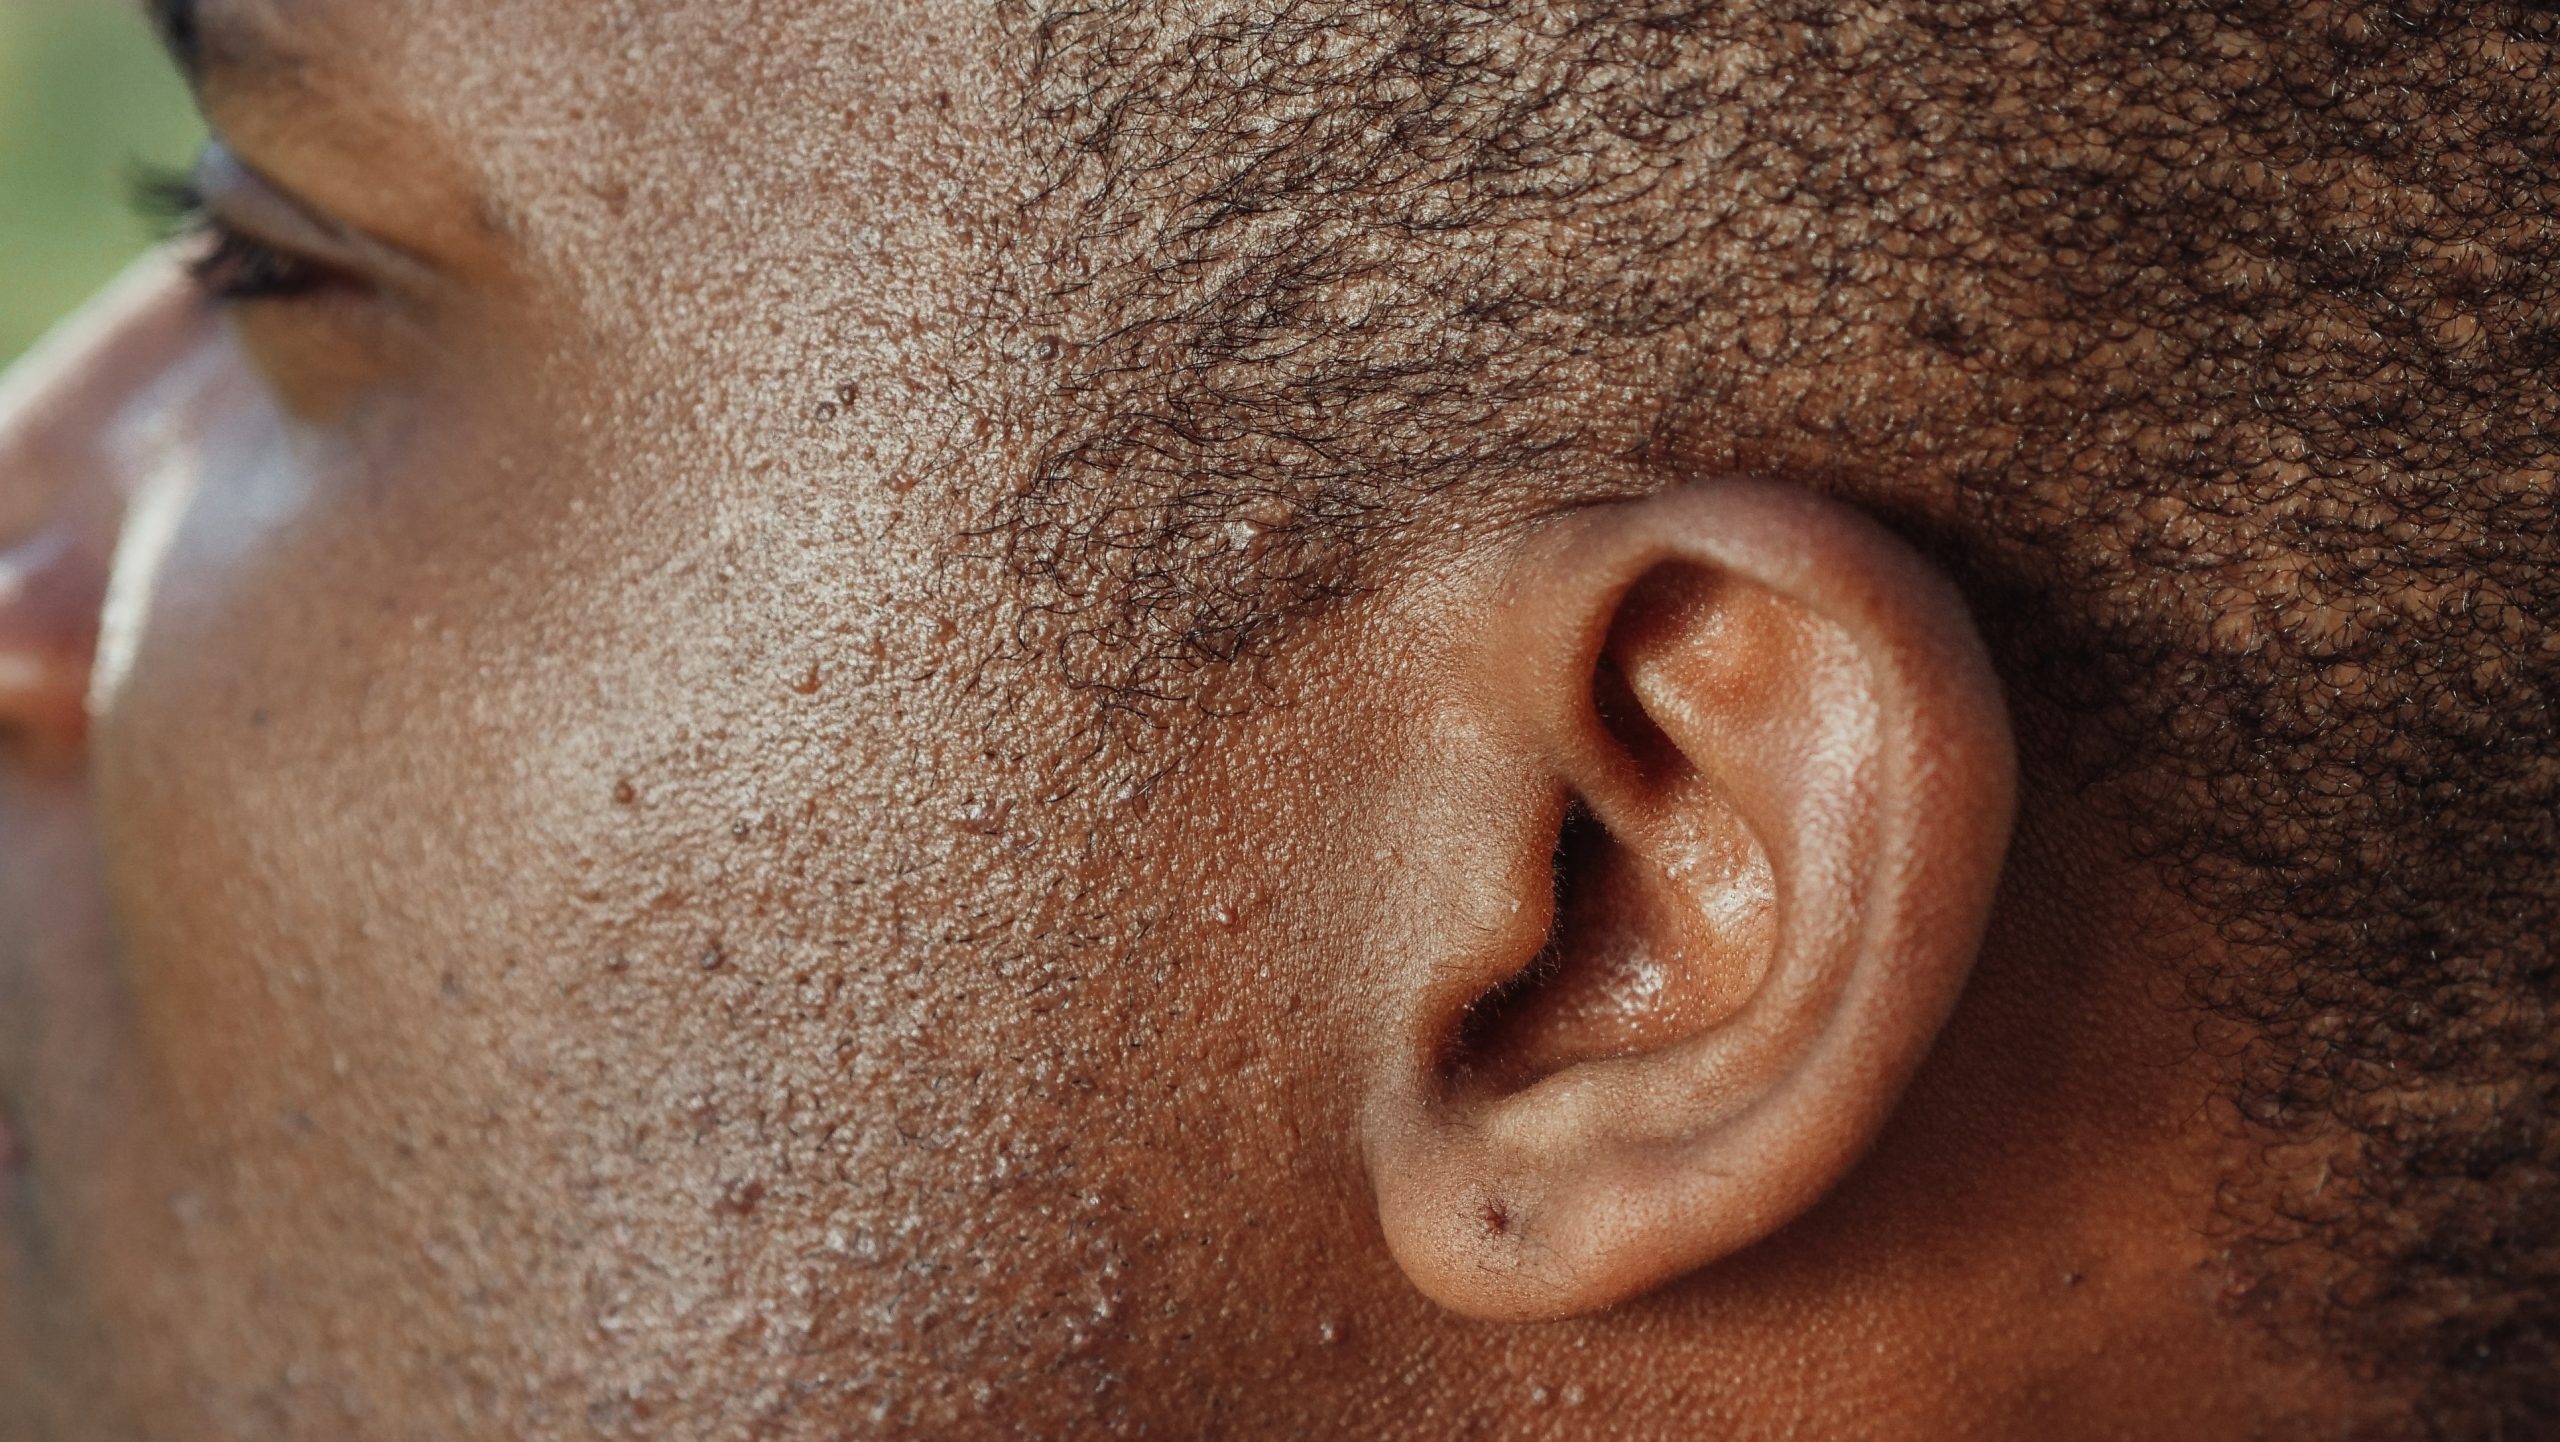 What is Micro-suction Ear Wax Removal?